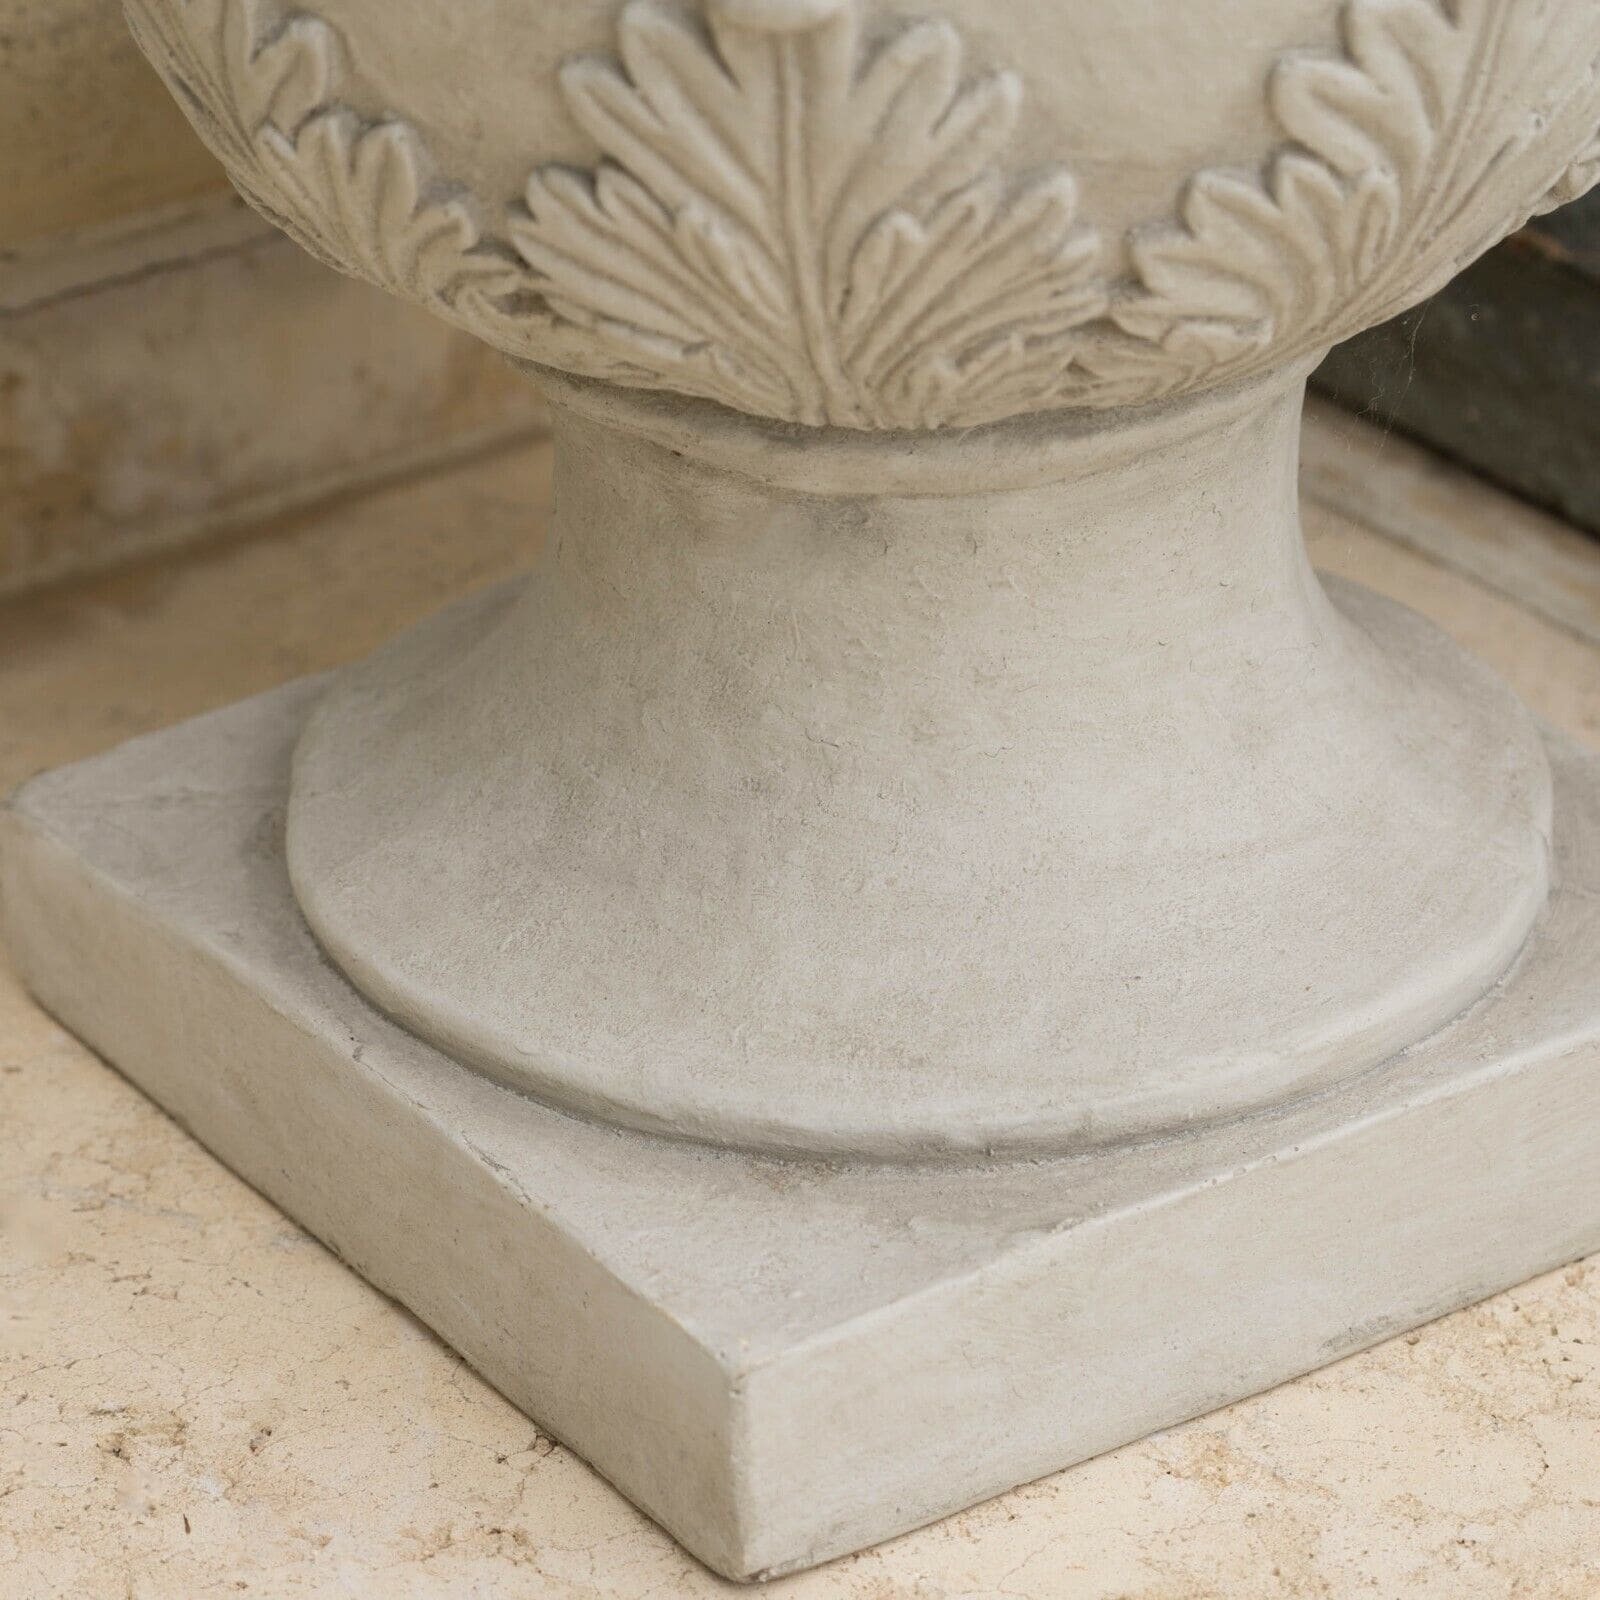 A white urn on top of a tiled floor.